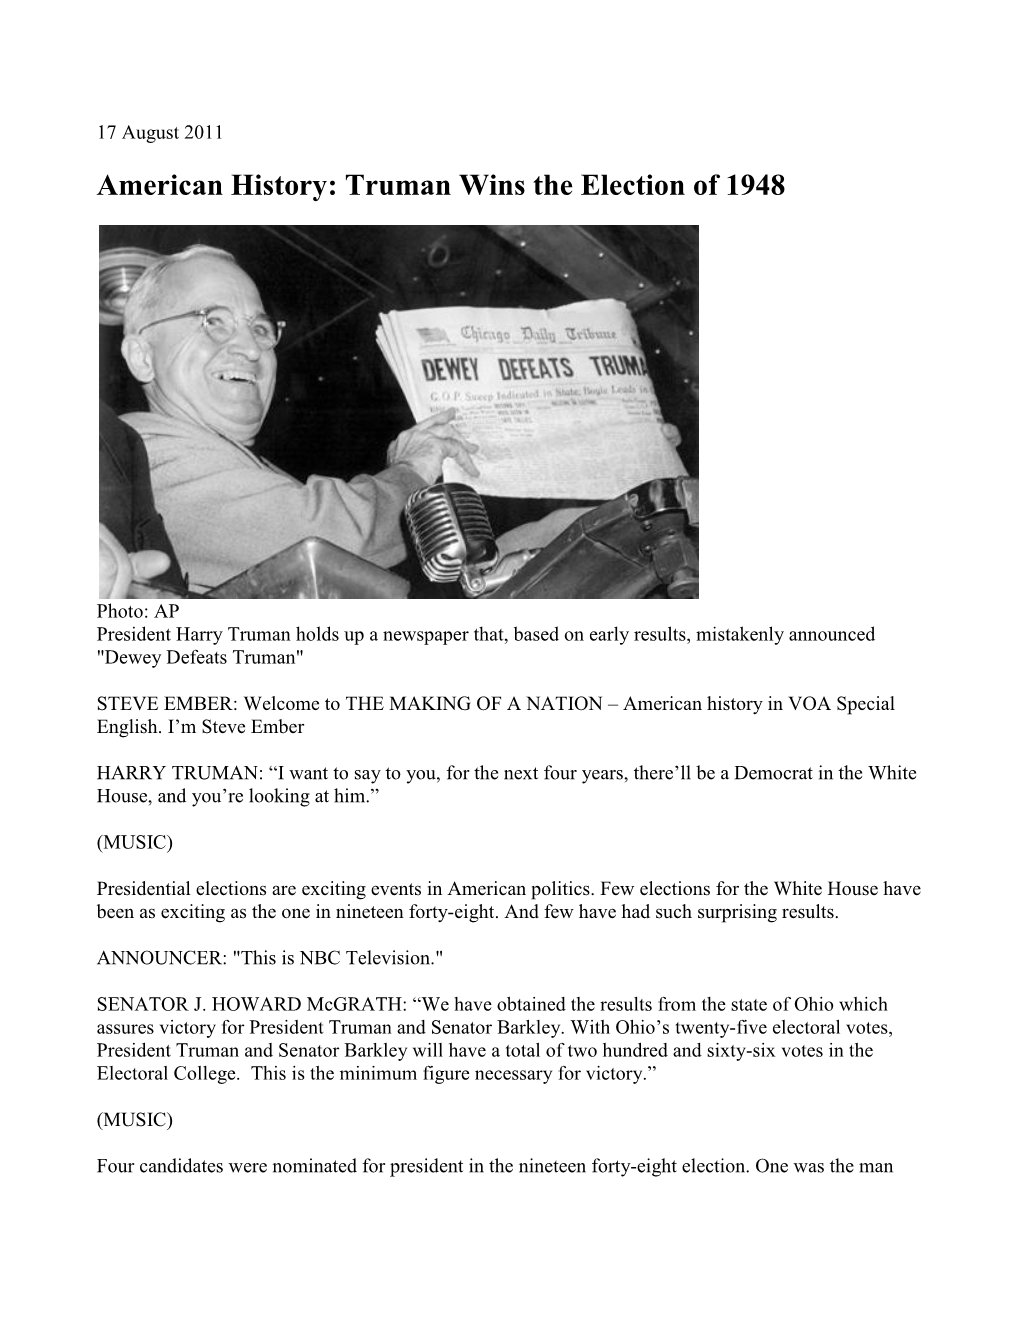 American History: Truman Wins the Election of 1948